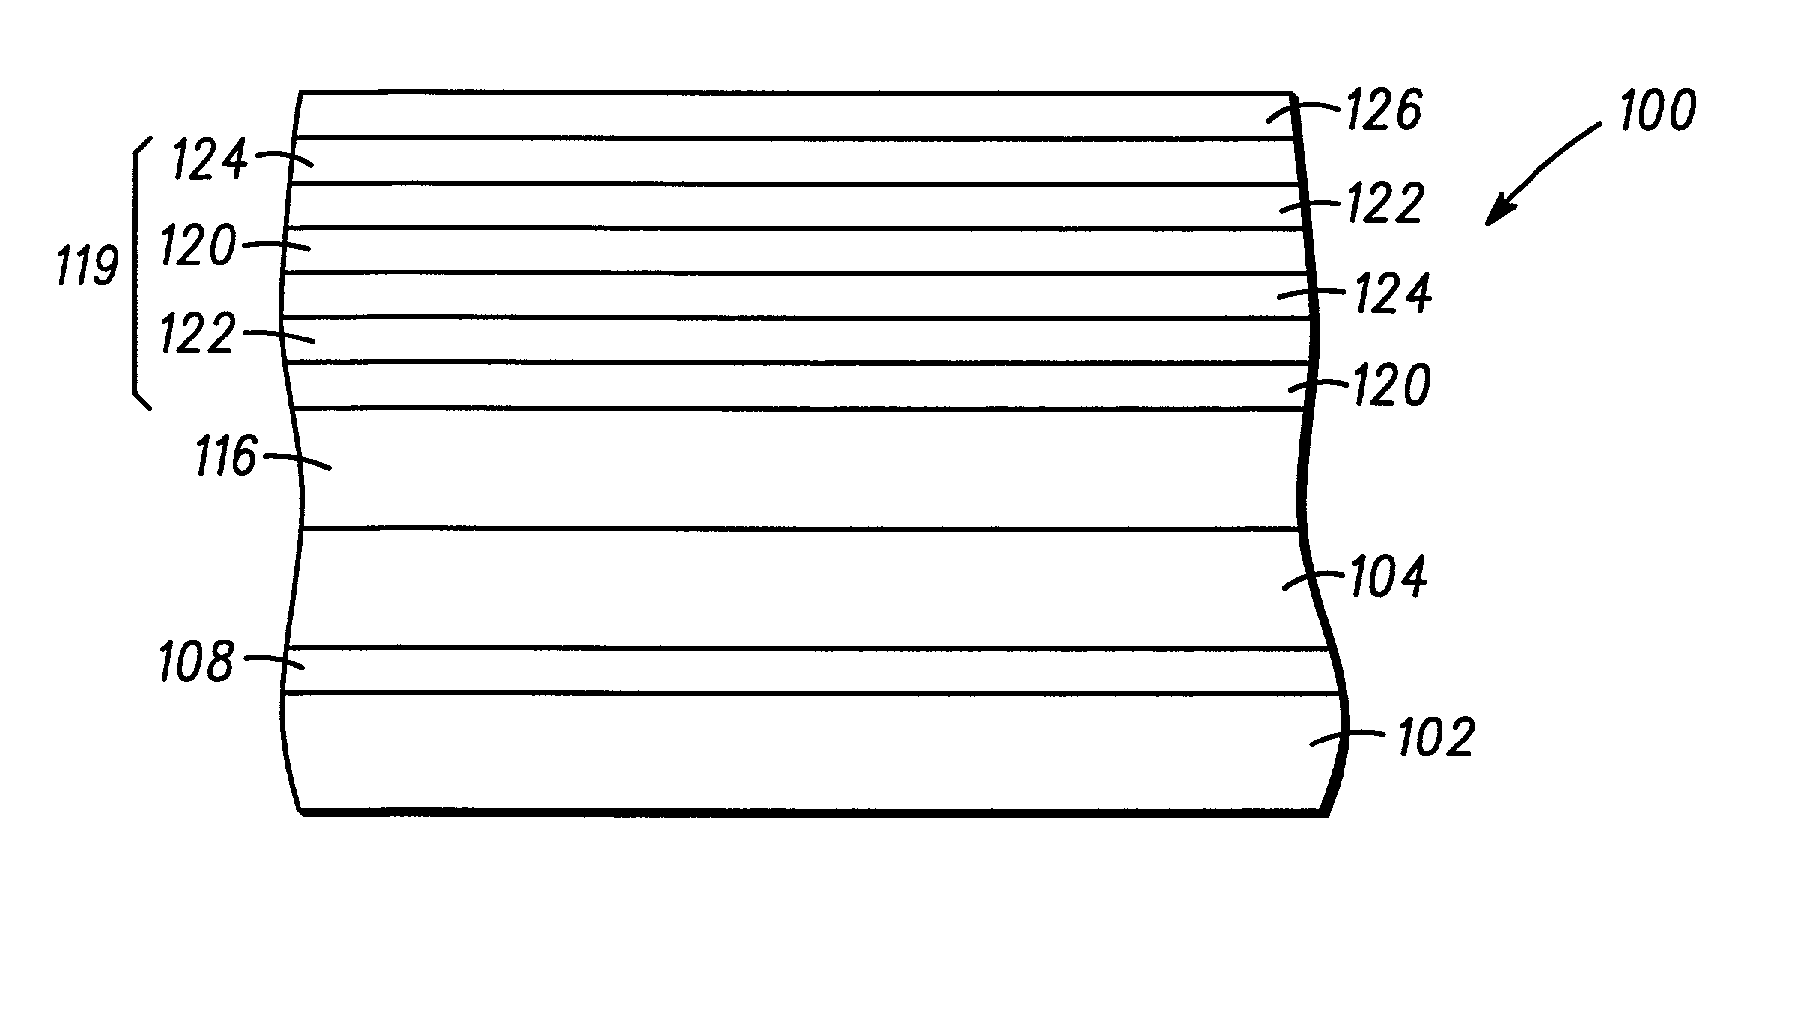 Structure and method for fabricating semiconductor structures and devices utilizing the formation of a compliant III-V arsenide nitride substrate used to form the same